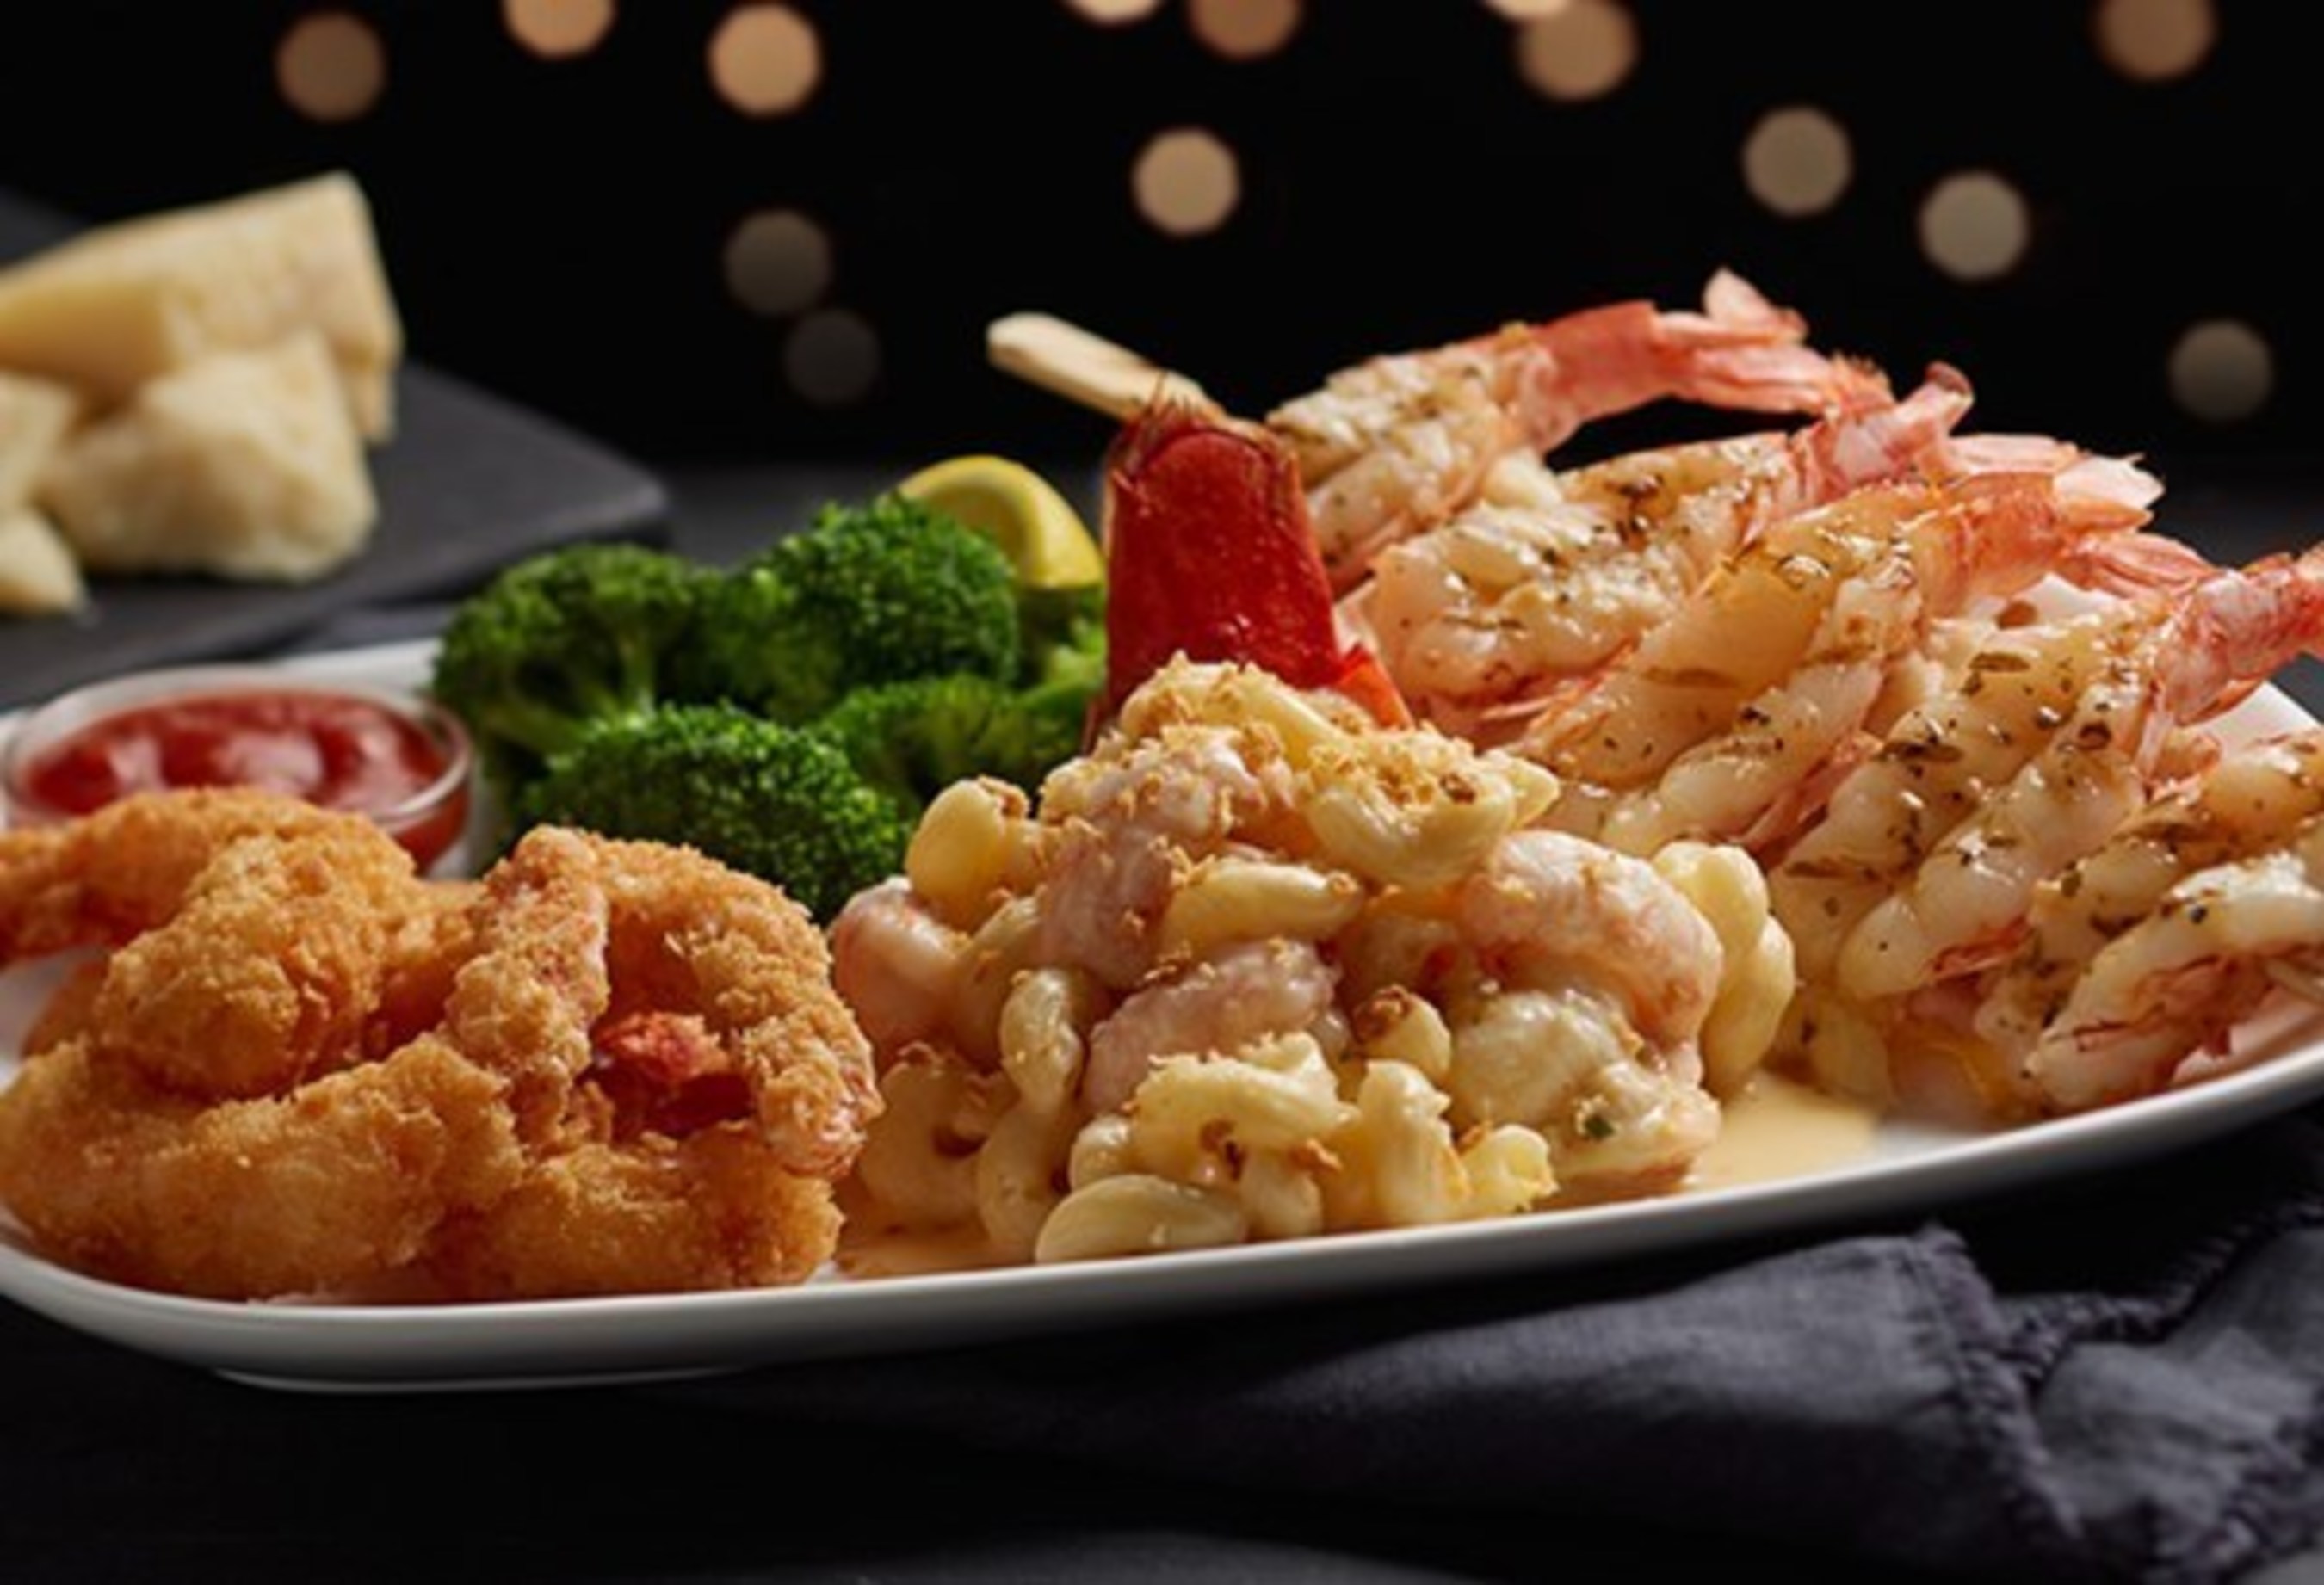 Red Lobster's NEW! Wild-Caught Lobster-and-Shrimp Trio features a wood-grilled Maine lobster tail topped with Norway lobster mac-and-cheese, paired with a garlic-grilled red shrimp skewer and panko-crusted red shrimp with Red Lobster's classic cocktail sauce.